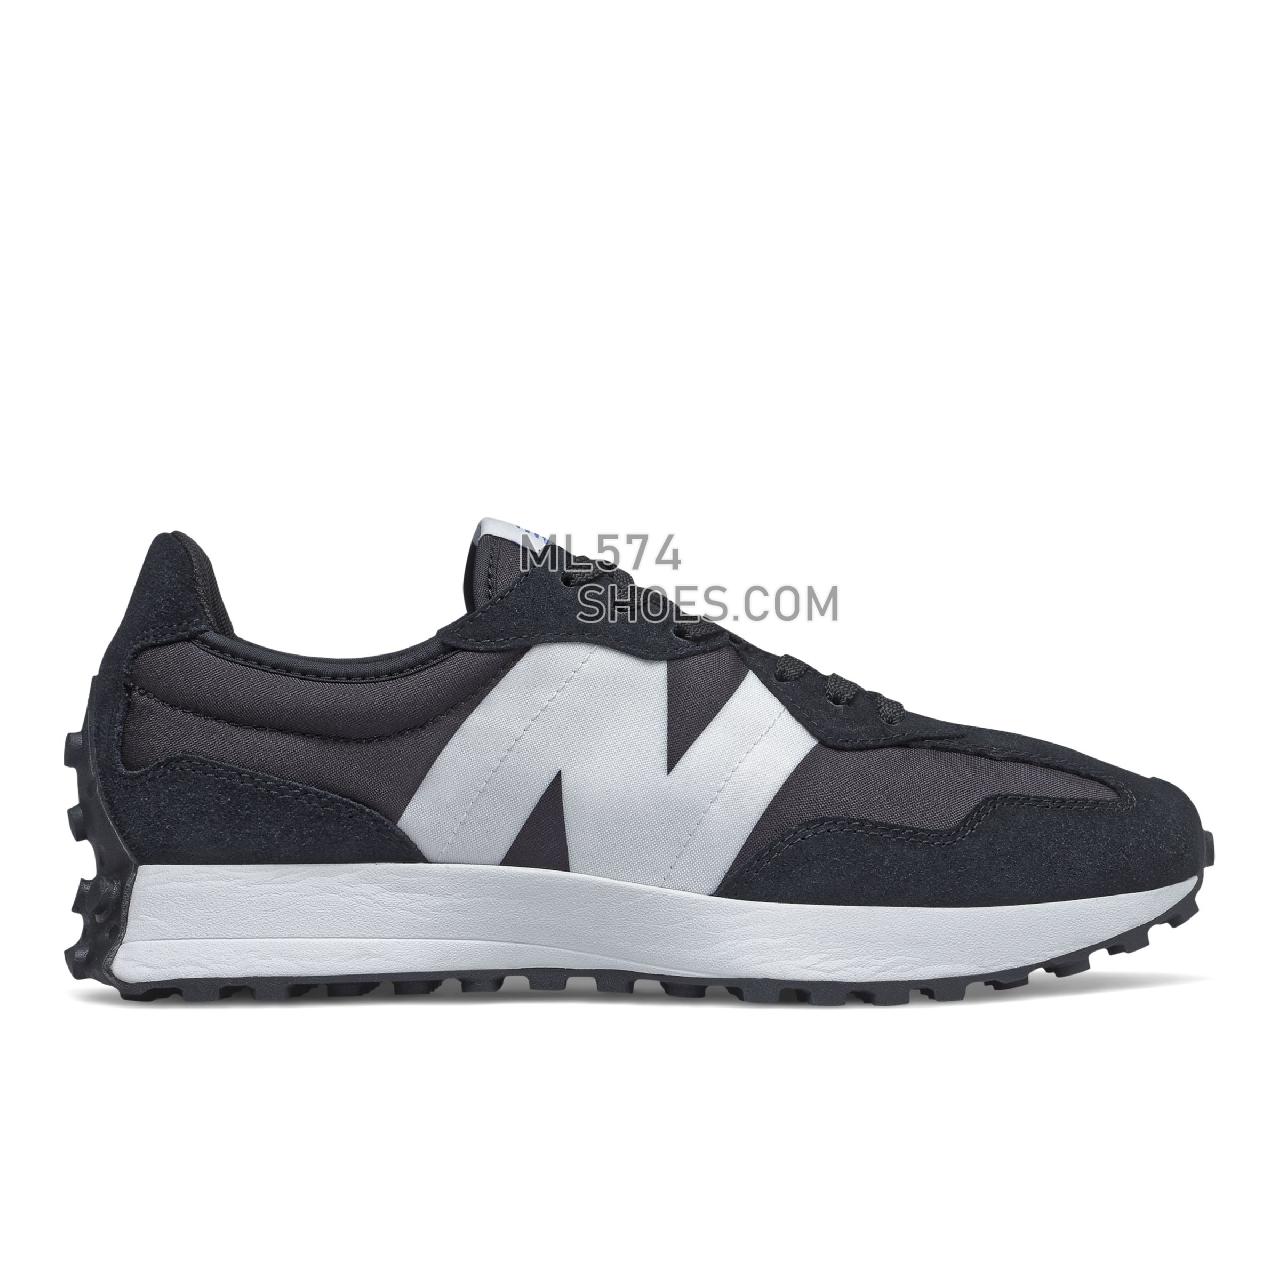 New Balance 327 - Unisex Men's Women's Sport Style Sneakers - Black with White - MS327CPG